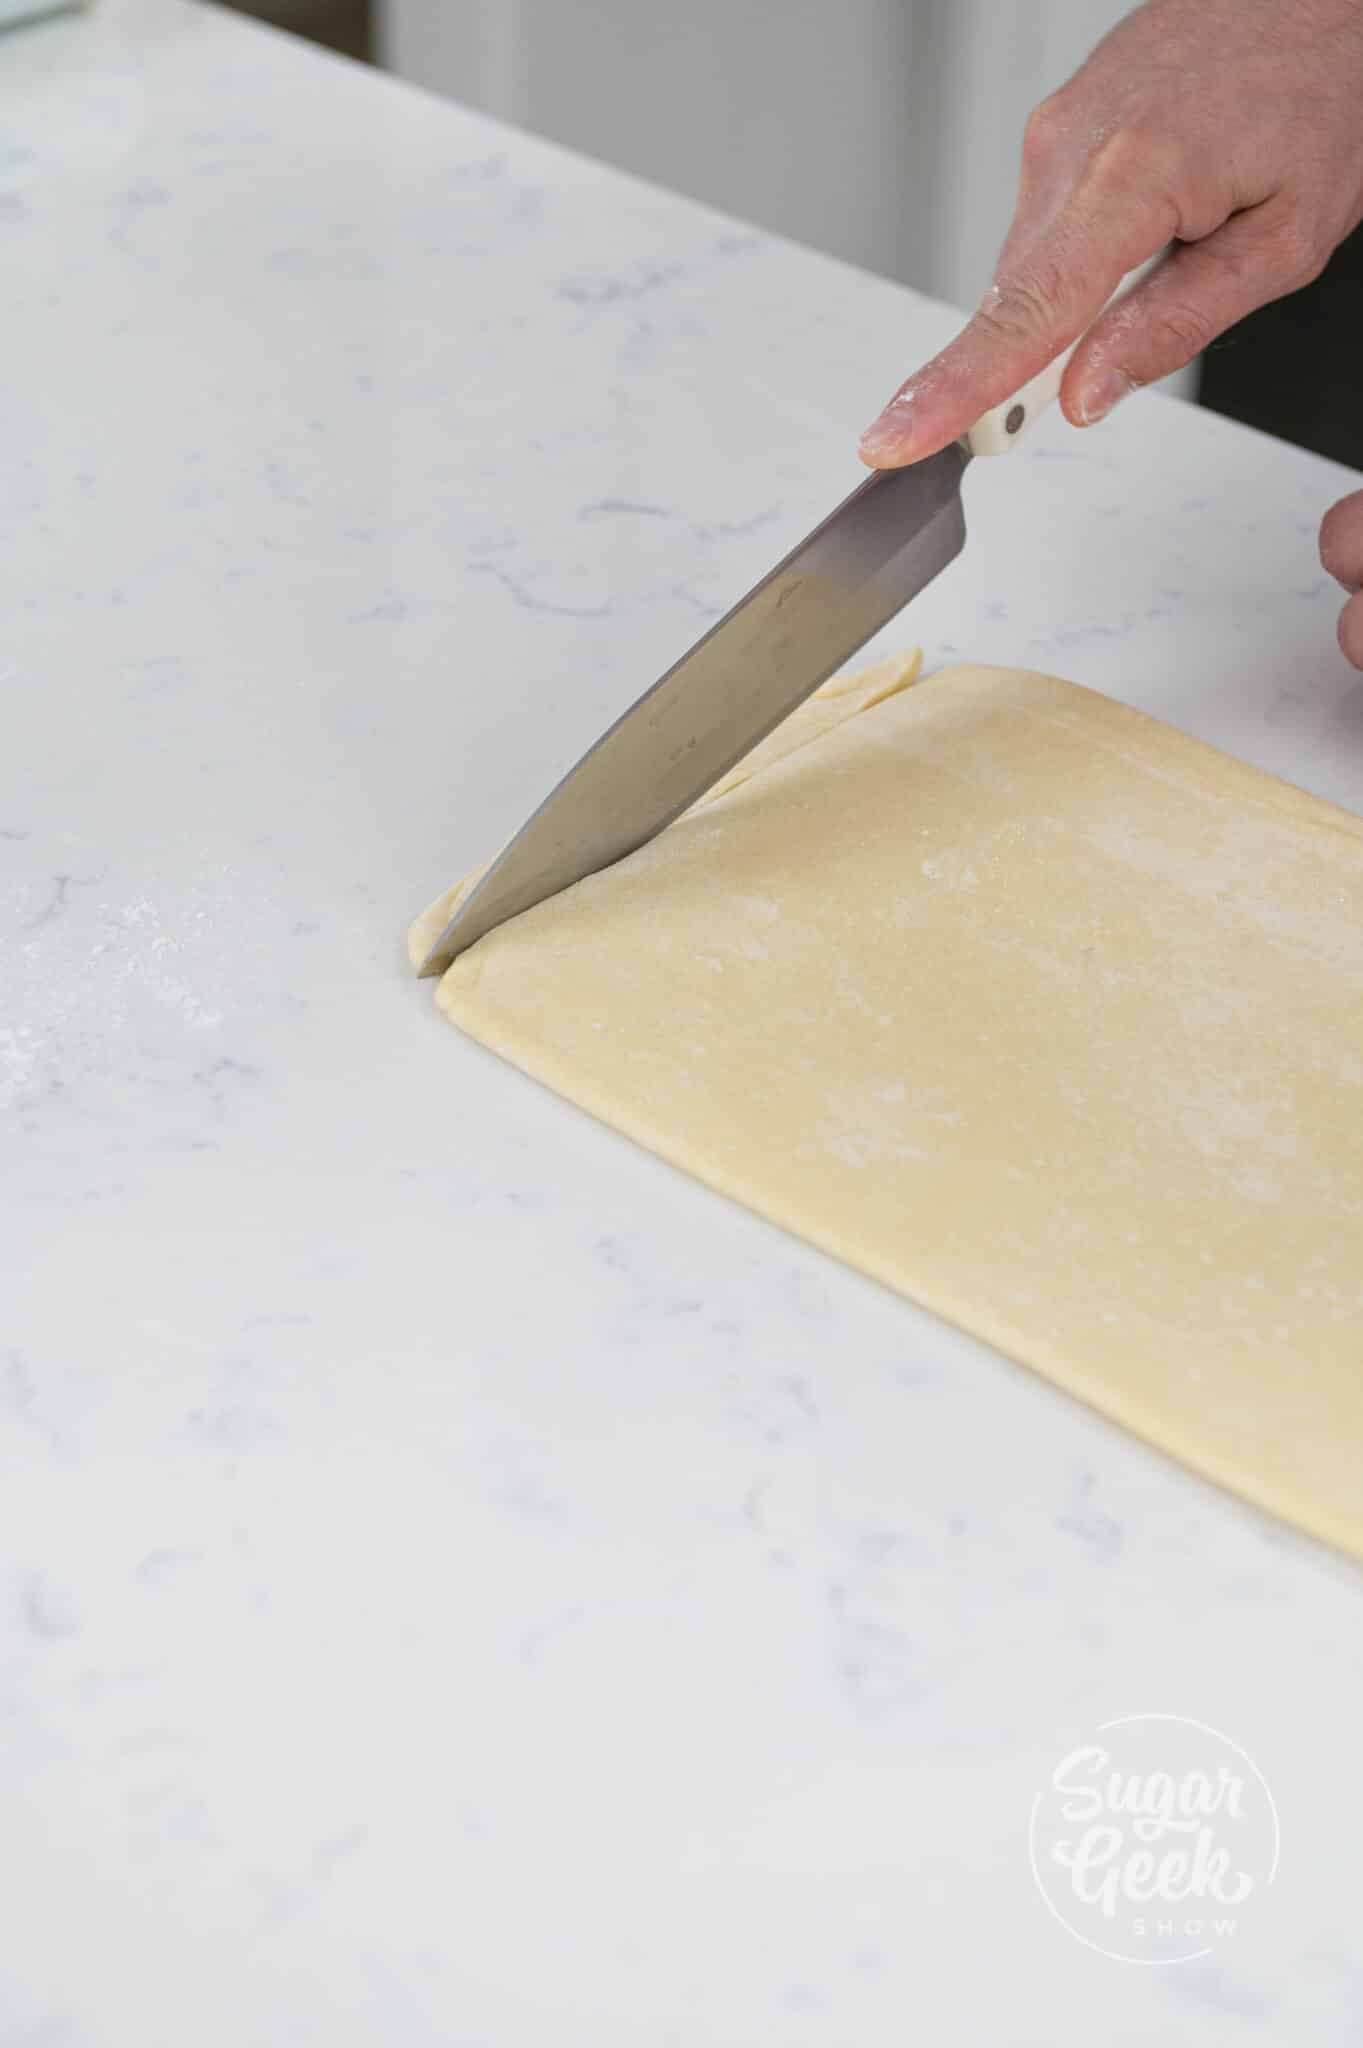 hands using knife to cut ends of the dough.